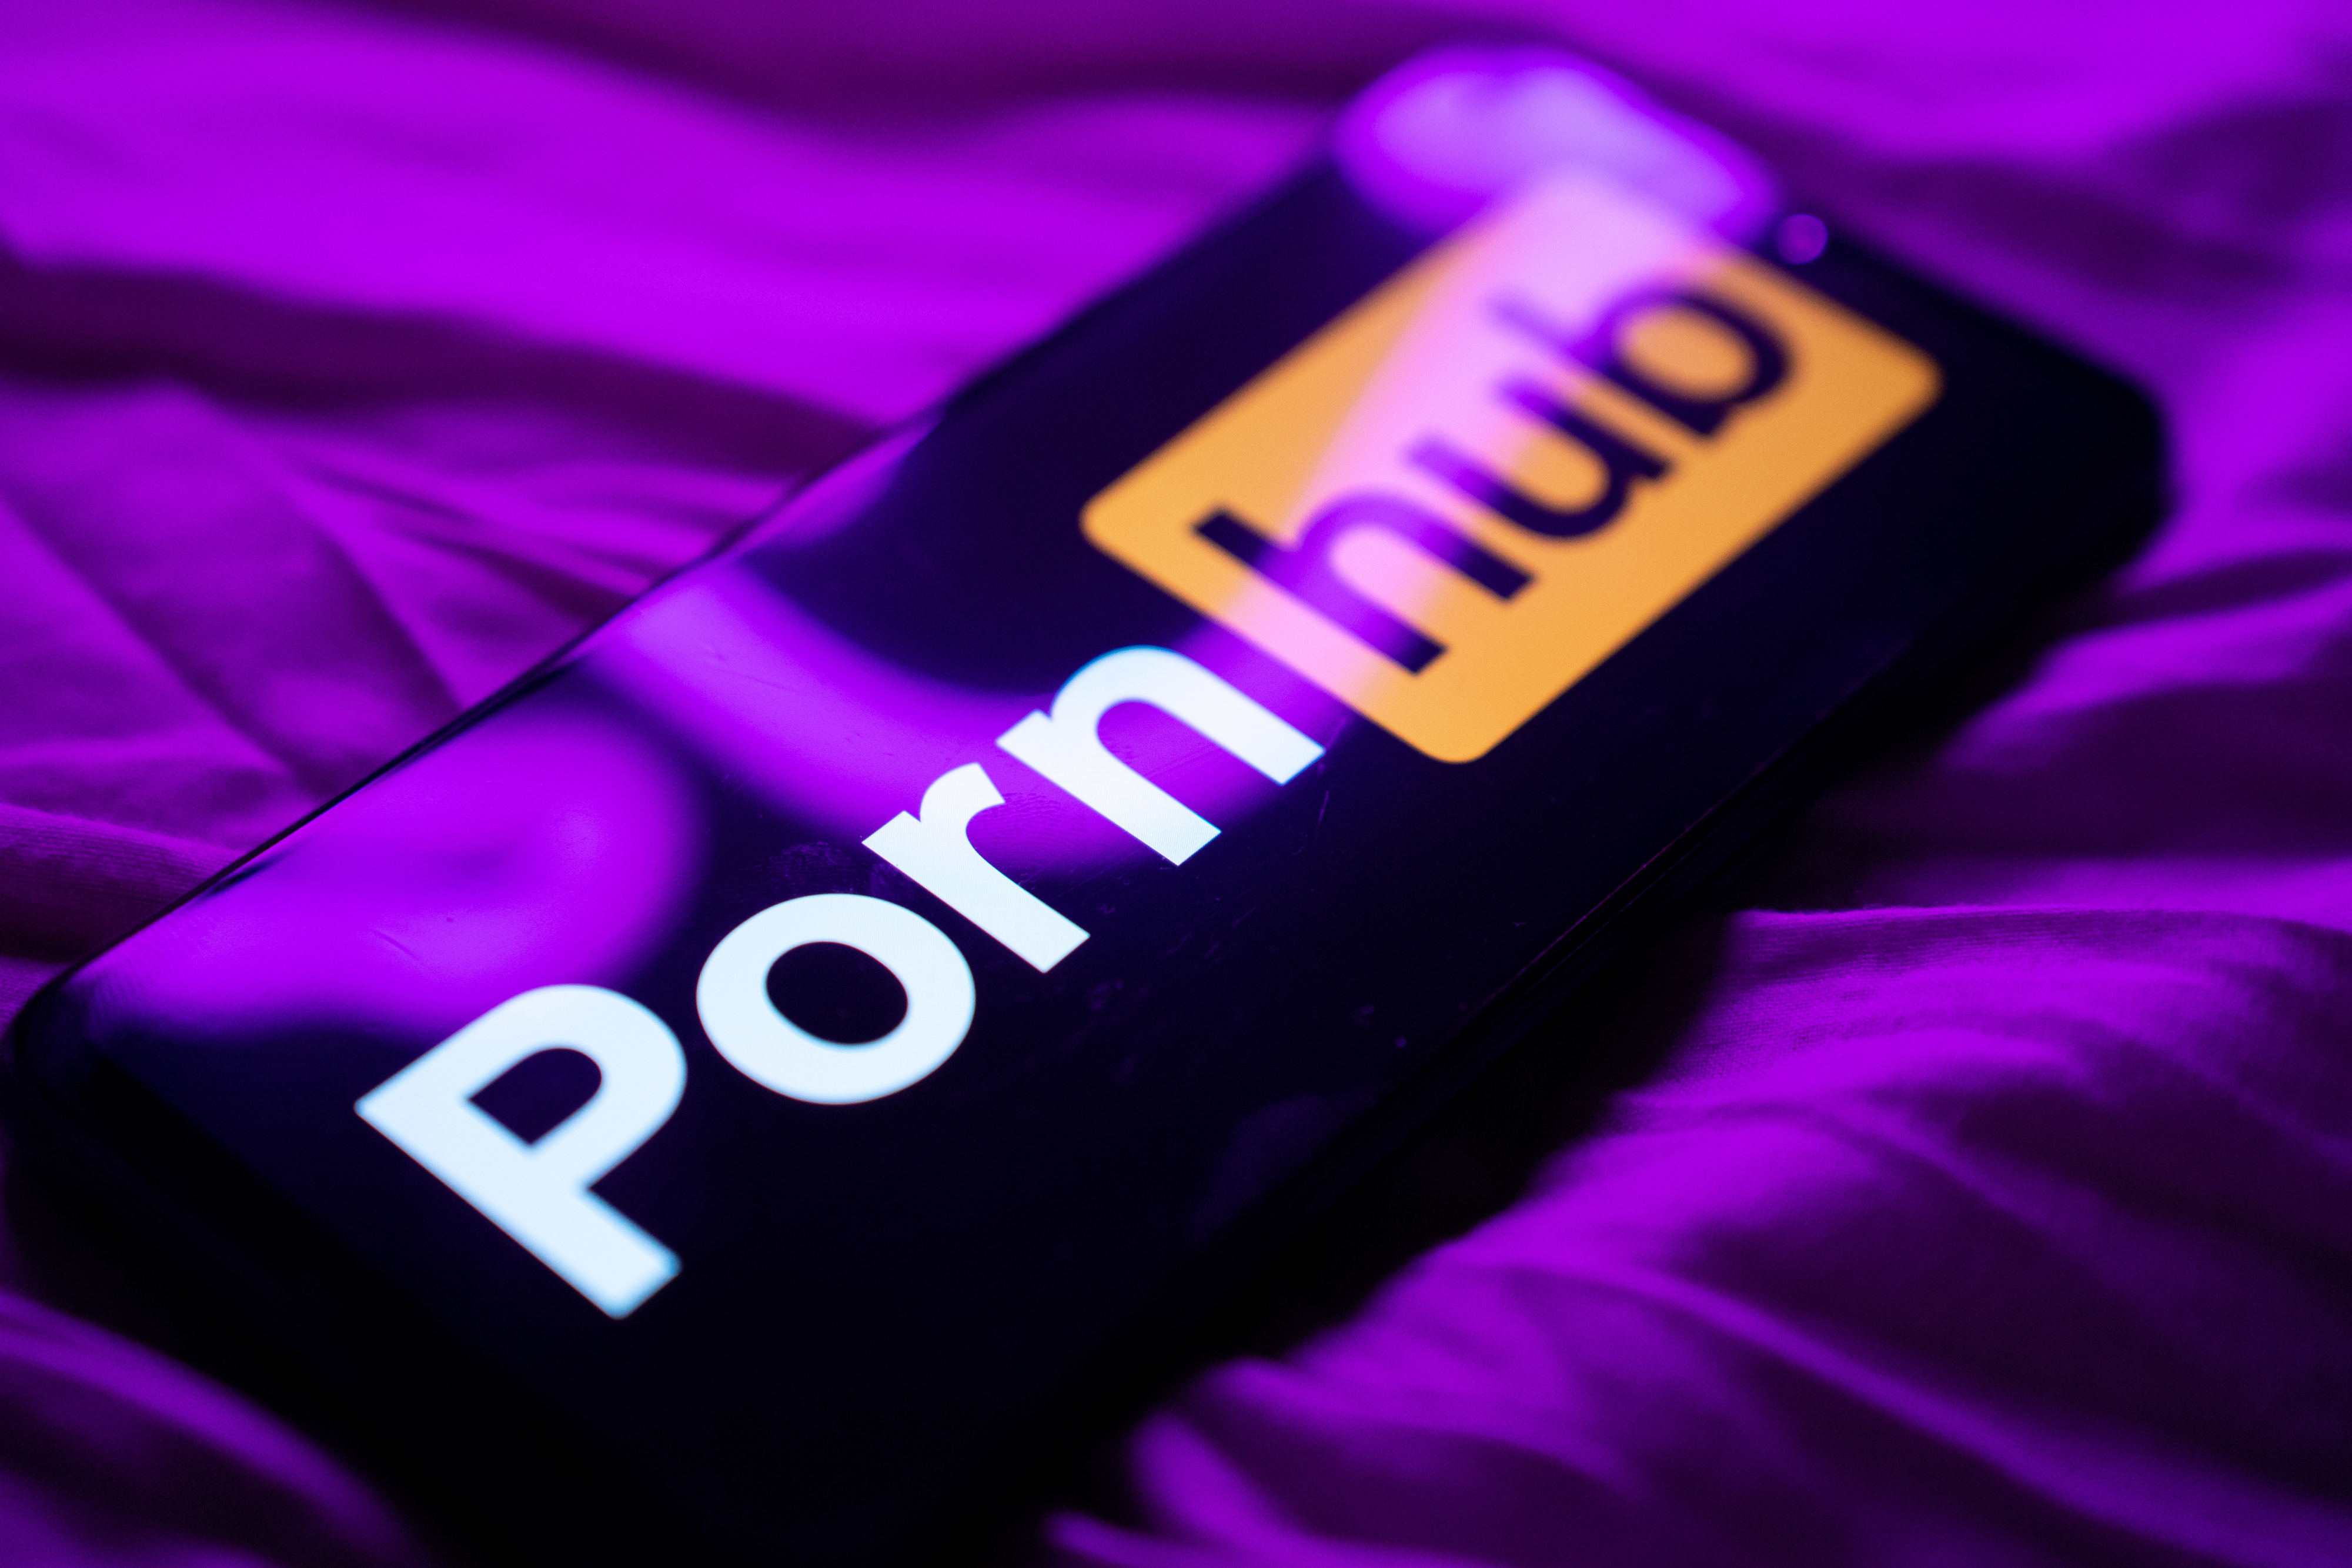 Logo of an adult content website displayed on a smartphone screen